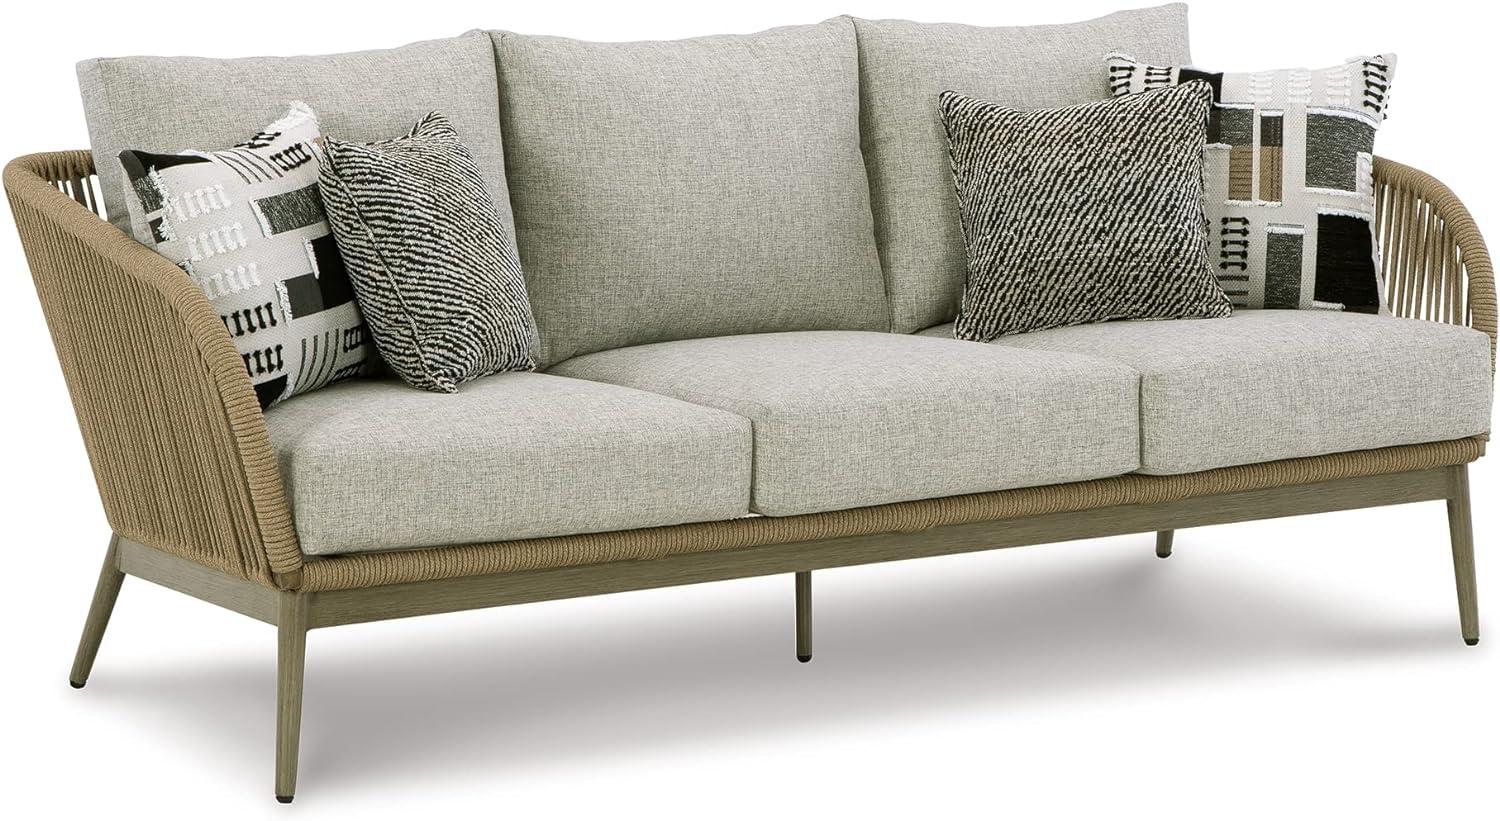 Swiss Valley Transitional 76'' Beige and Gray Wicker Outdoor Sofa